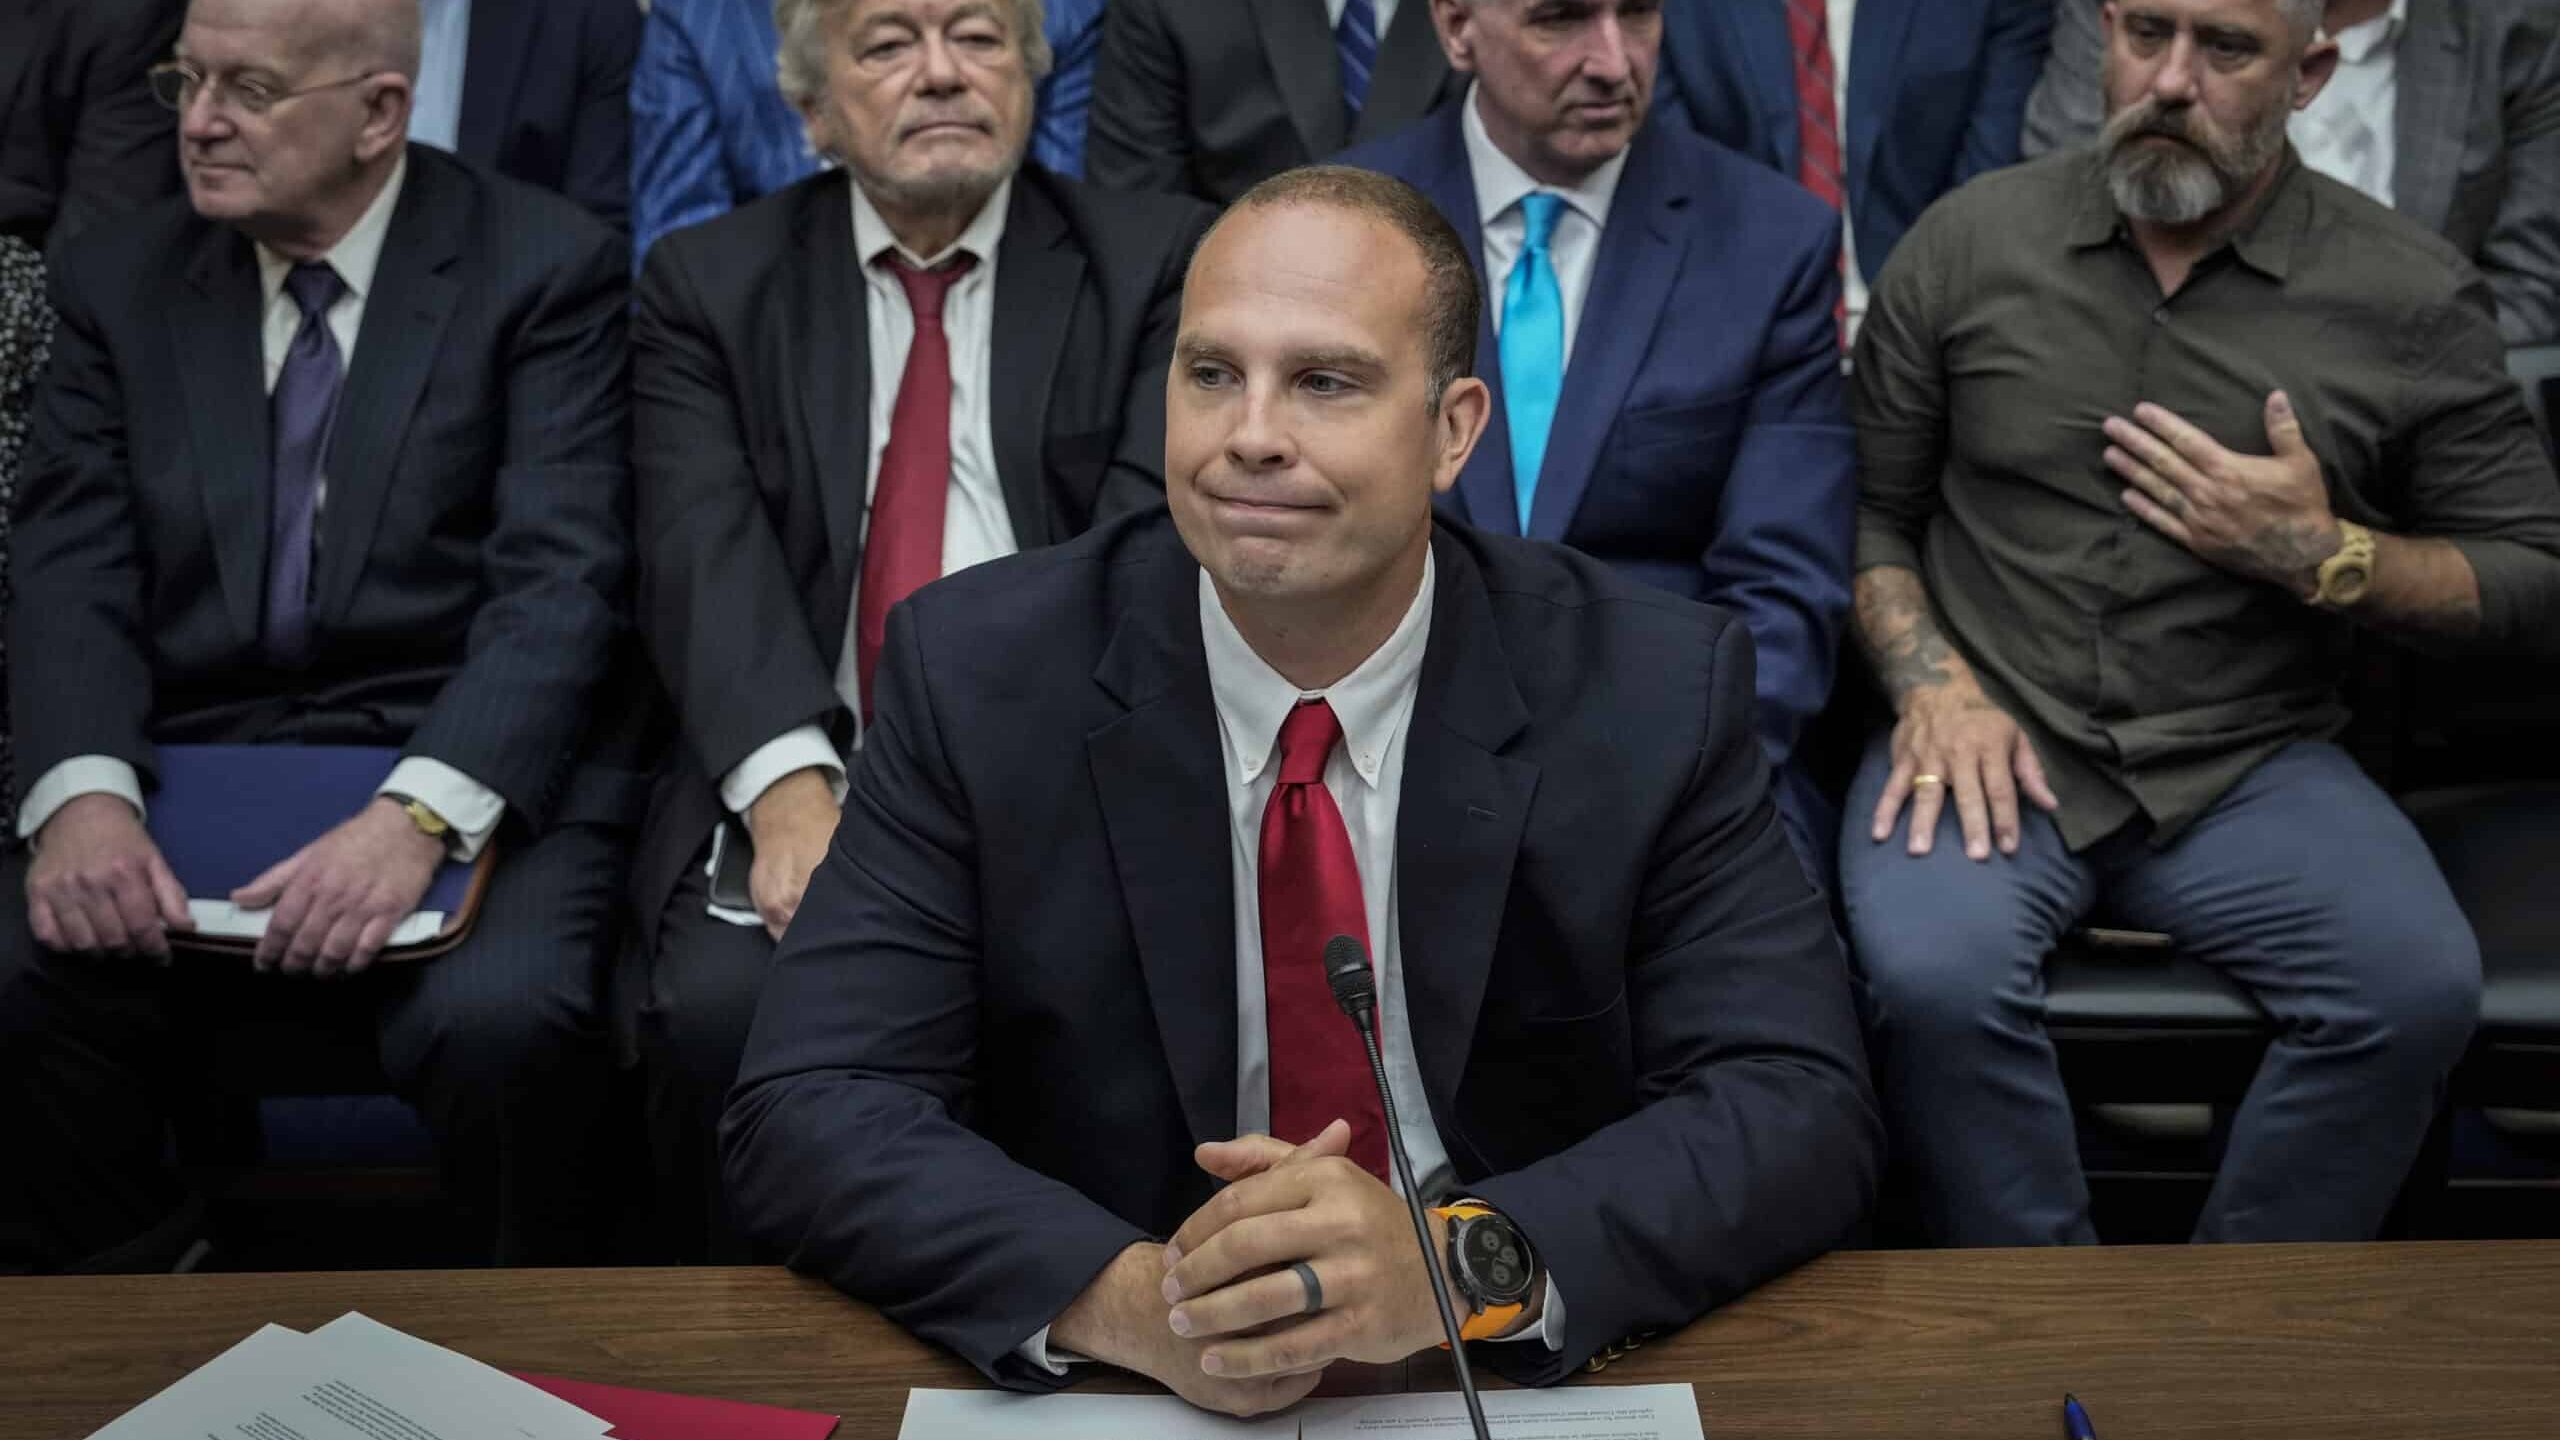 WASHINGTON, DC - JULY 26: David Grusch, former National Reconnaissance Officer Representative of Unidentified Anomalous Phenomena Task Force at the U.S. Department of Defense, takes his seat as he arrives for a House Oversight Committee hearing titled "Unidentified Anomalous Phenomena: Implications on National Security, Public Safety, and Government Transparency" on Capitol Hill 26, 2023 in Washington, DC. Several witnesses are testifying about their experience with possible UFO encounters and discussion about a potential covert government program concerning debris from crashed, non-human origin spacecraft.